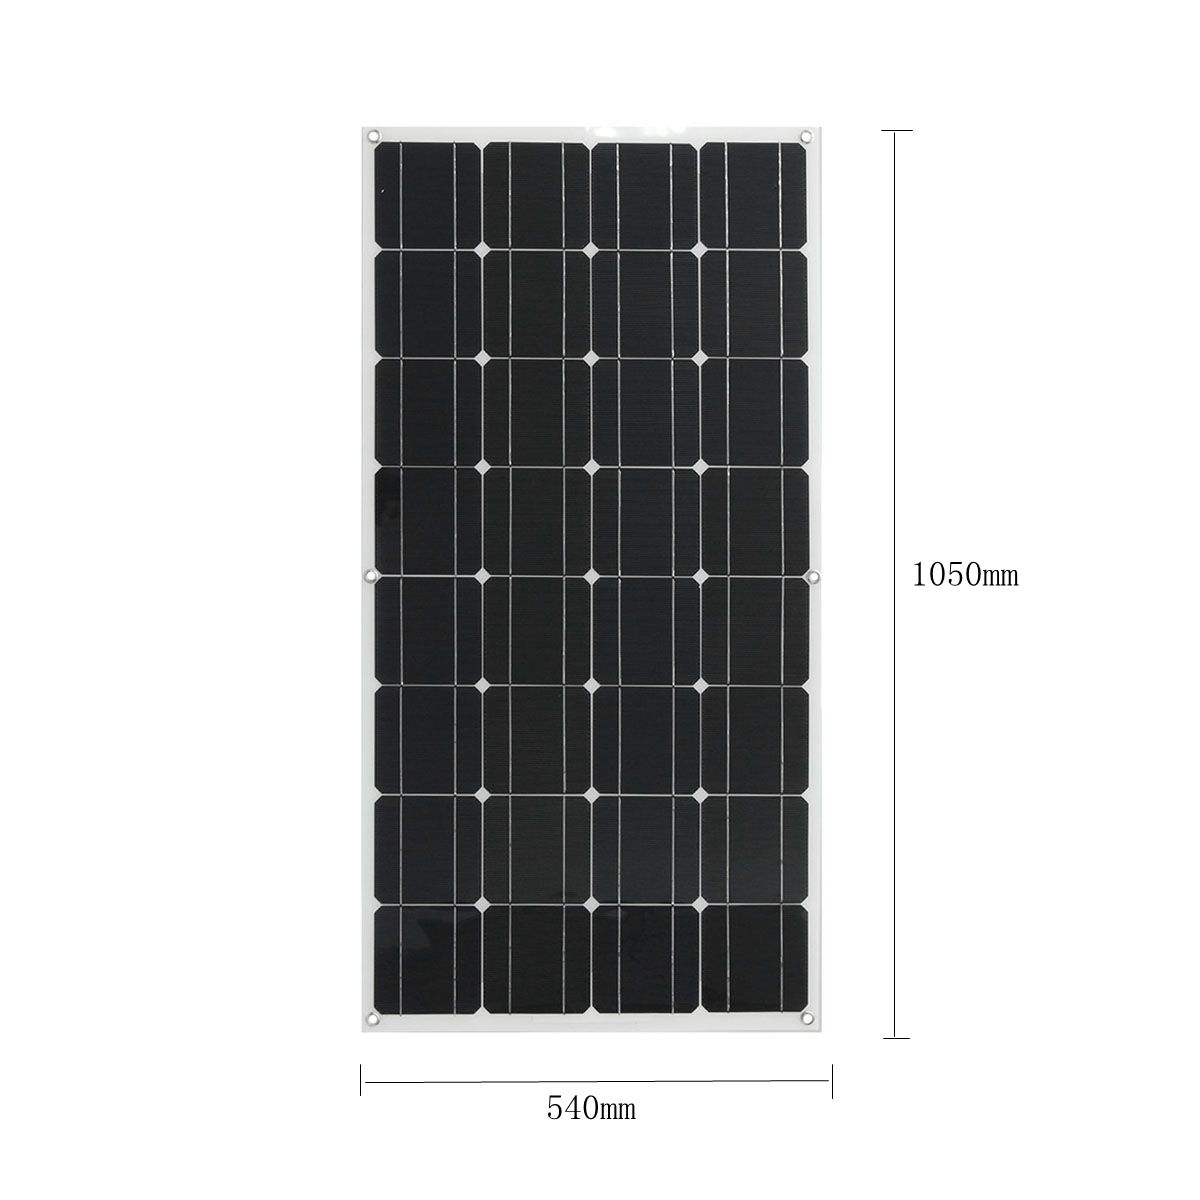 Elfeland® SP-38 18V 100W 1050x540x2.5mm Flexible Solar Panel With 1.5m Cable 8